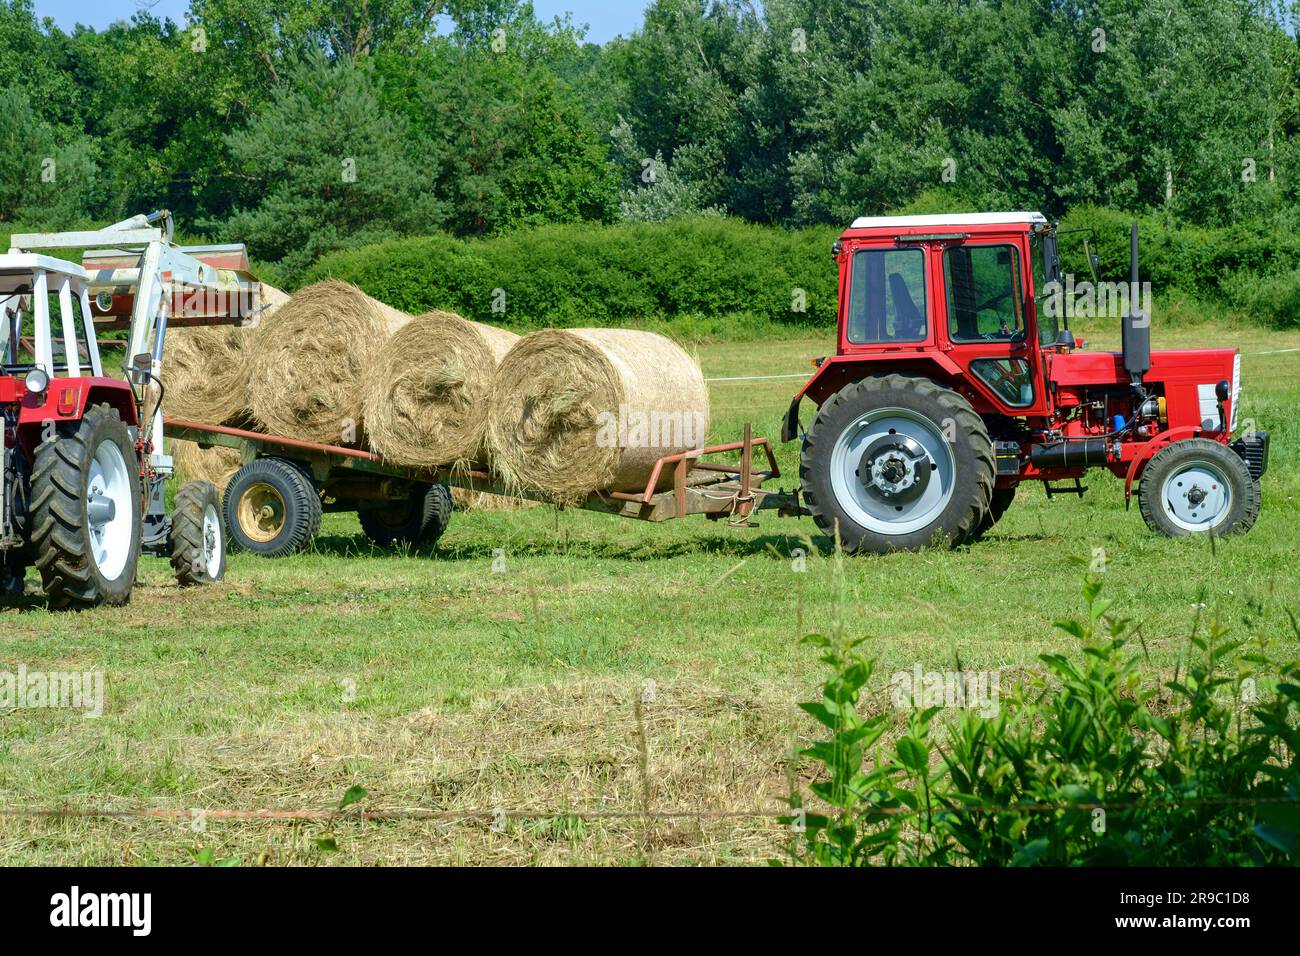 steyr 650 tractor being used to stack round hay bales unloaded from trailer after harvesting zala county hungary Stock Photo